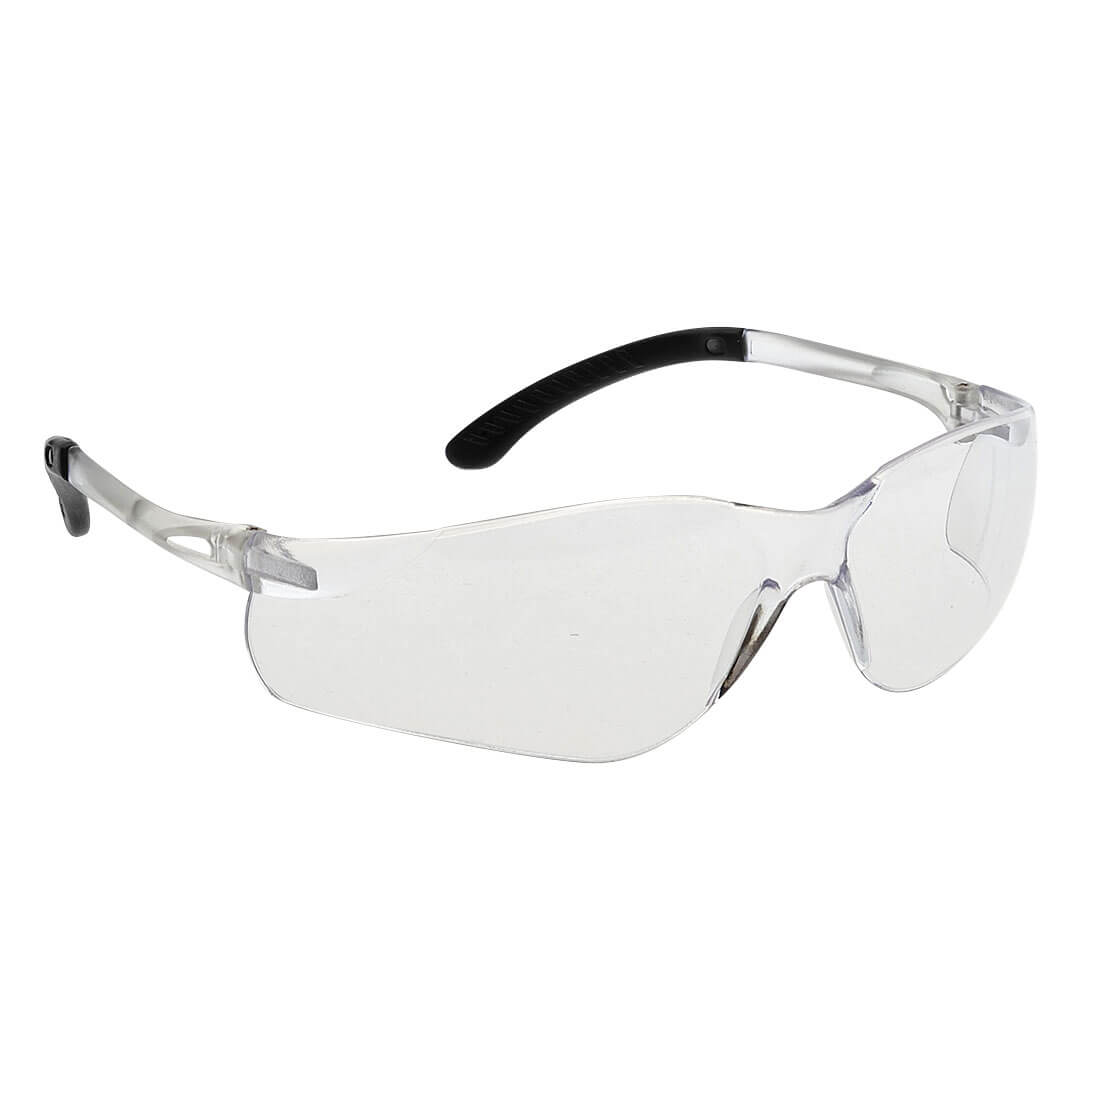 Pan View Spectacles  (PW38)